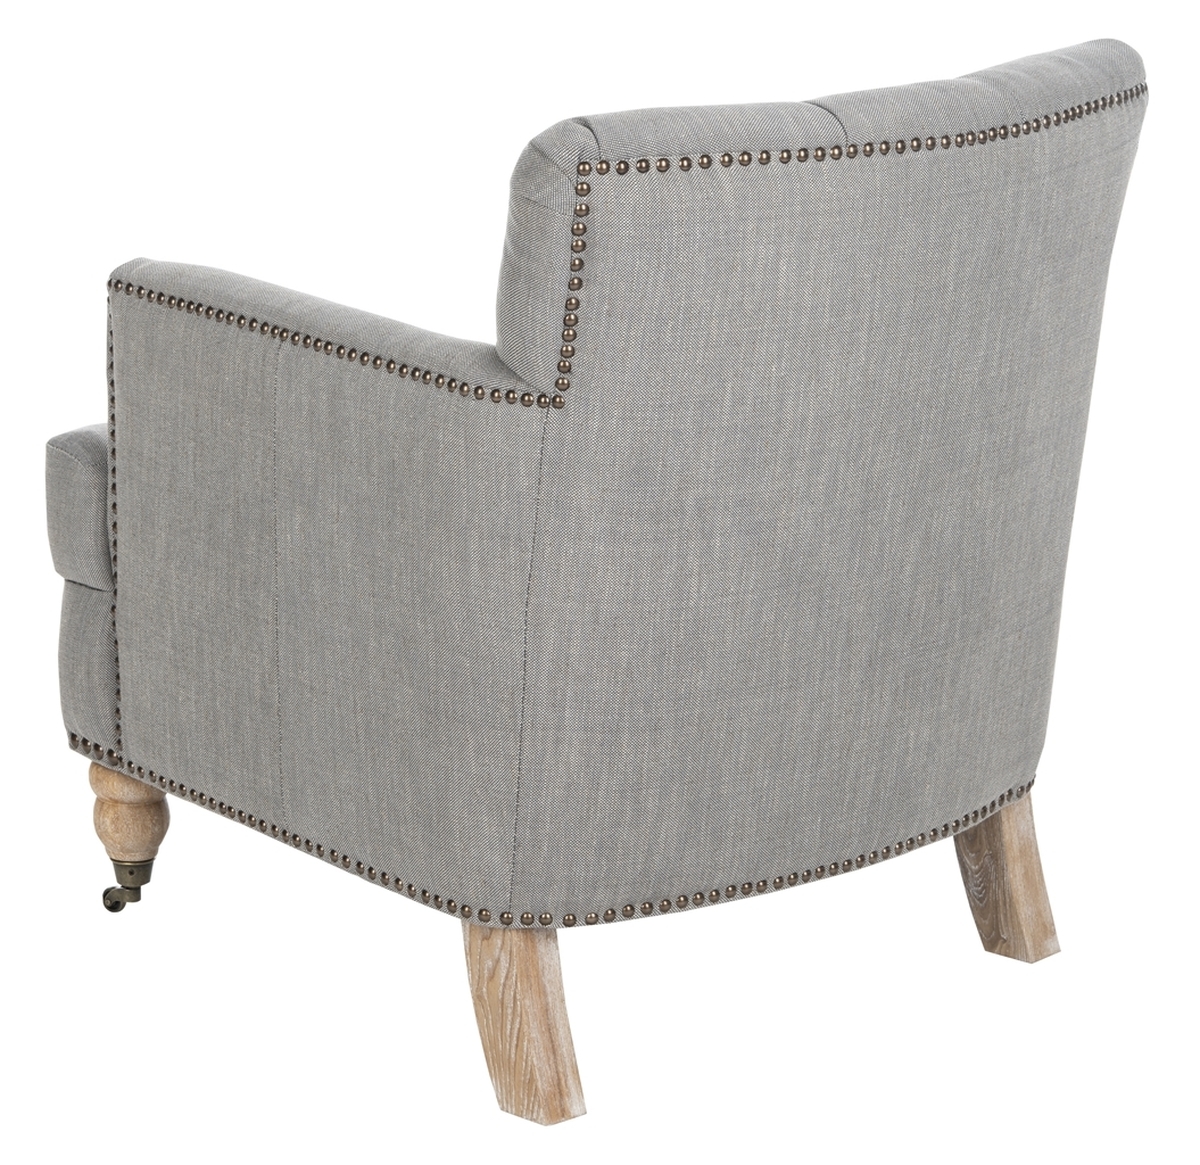 Colin Tufted Club Chair - Stone/Grey/White Wash - Arlo Home - Image 3